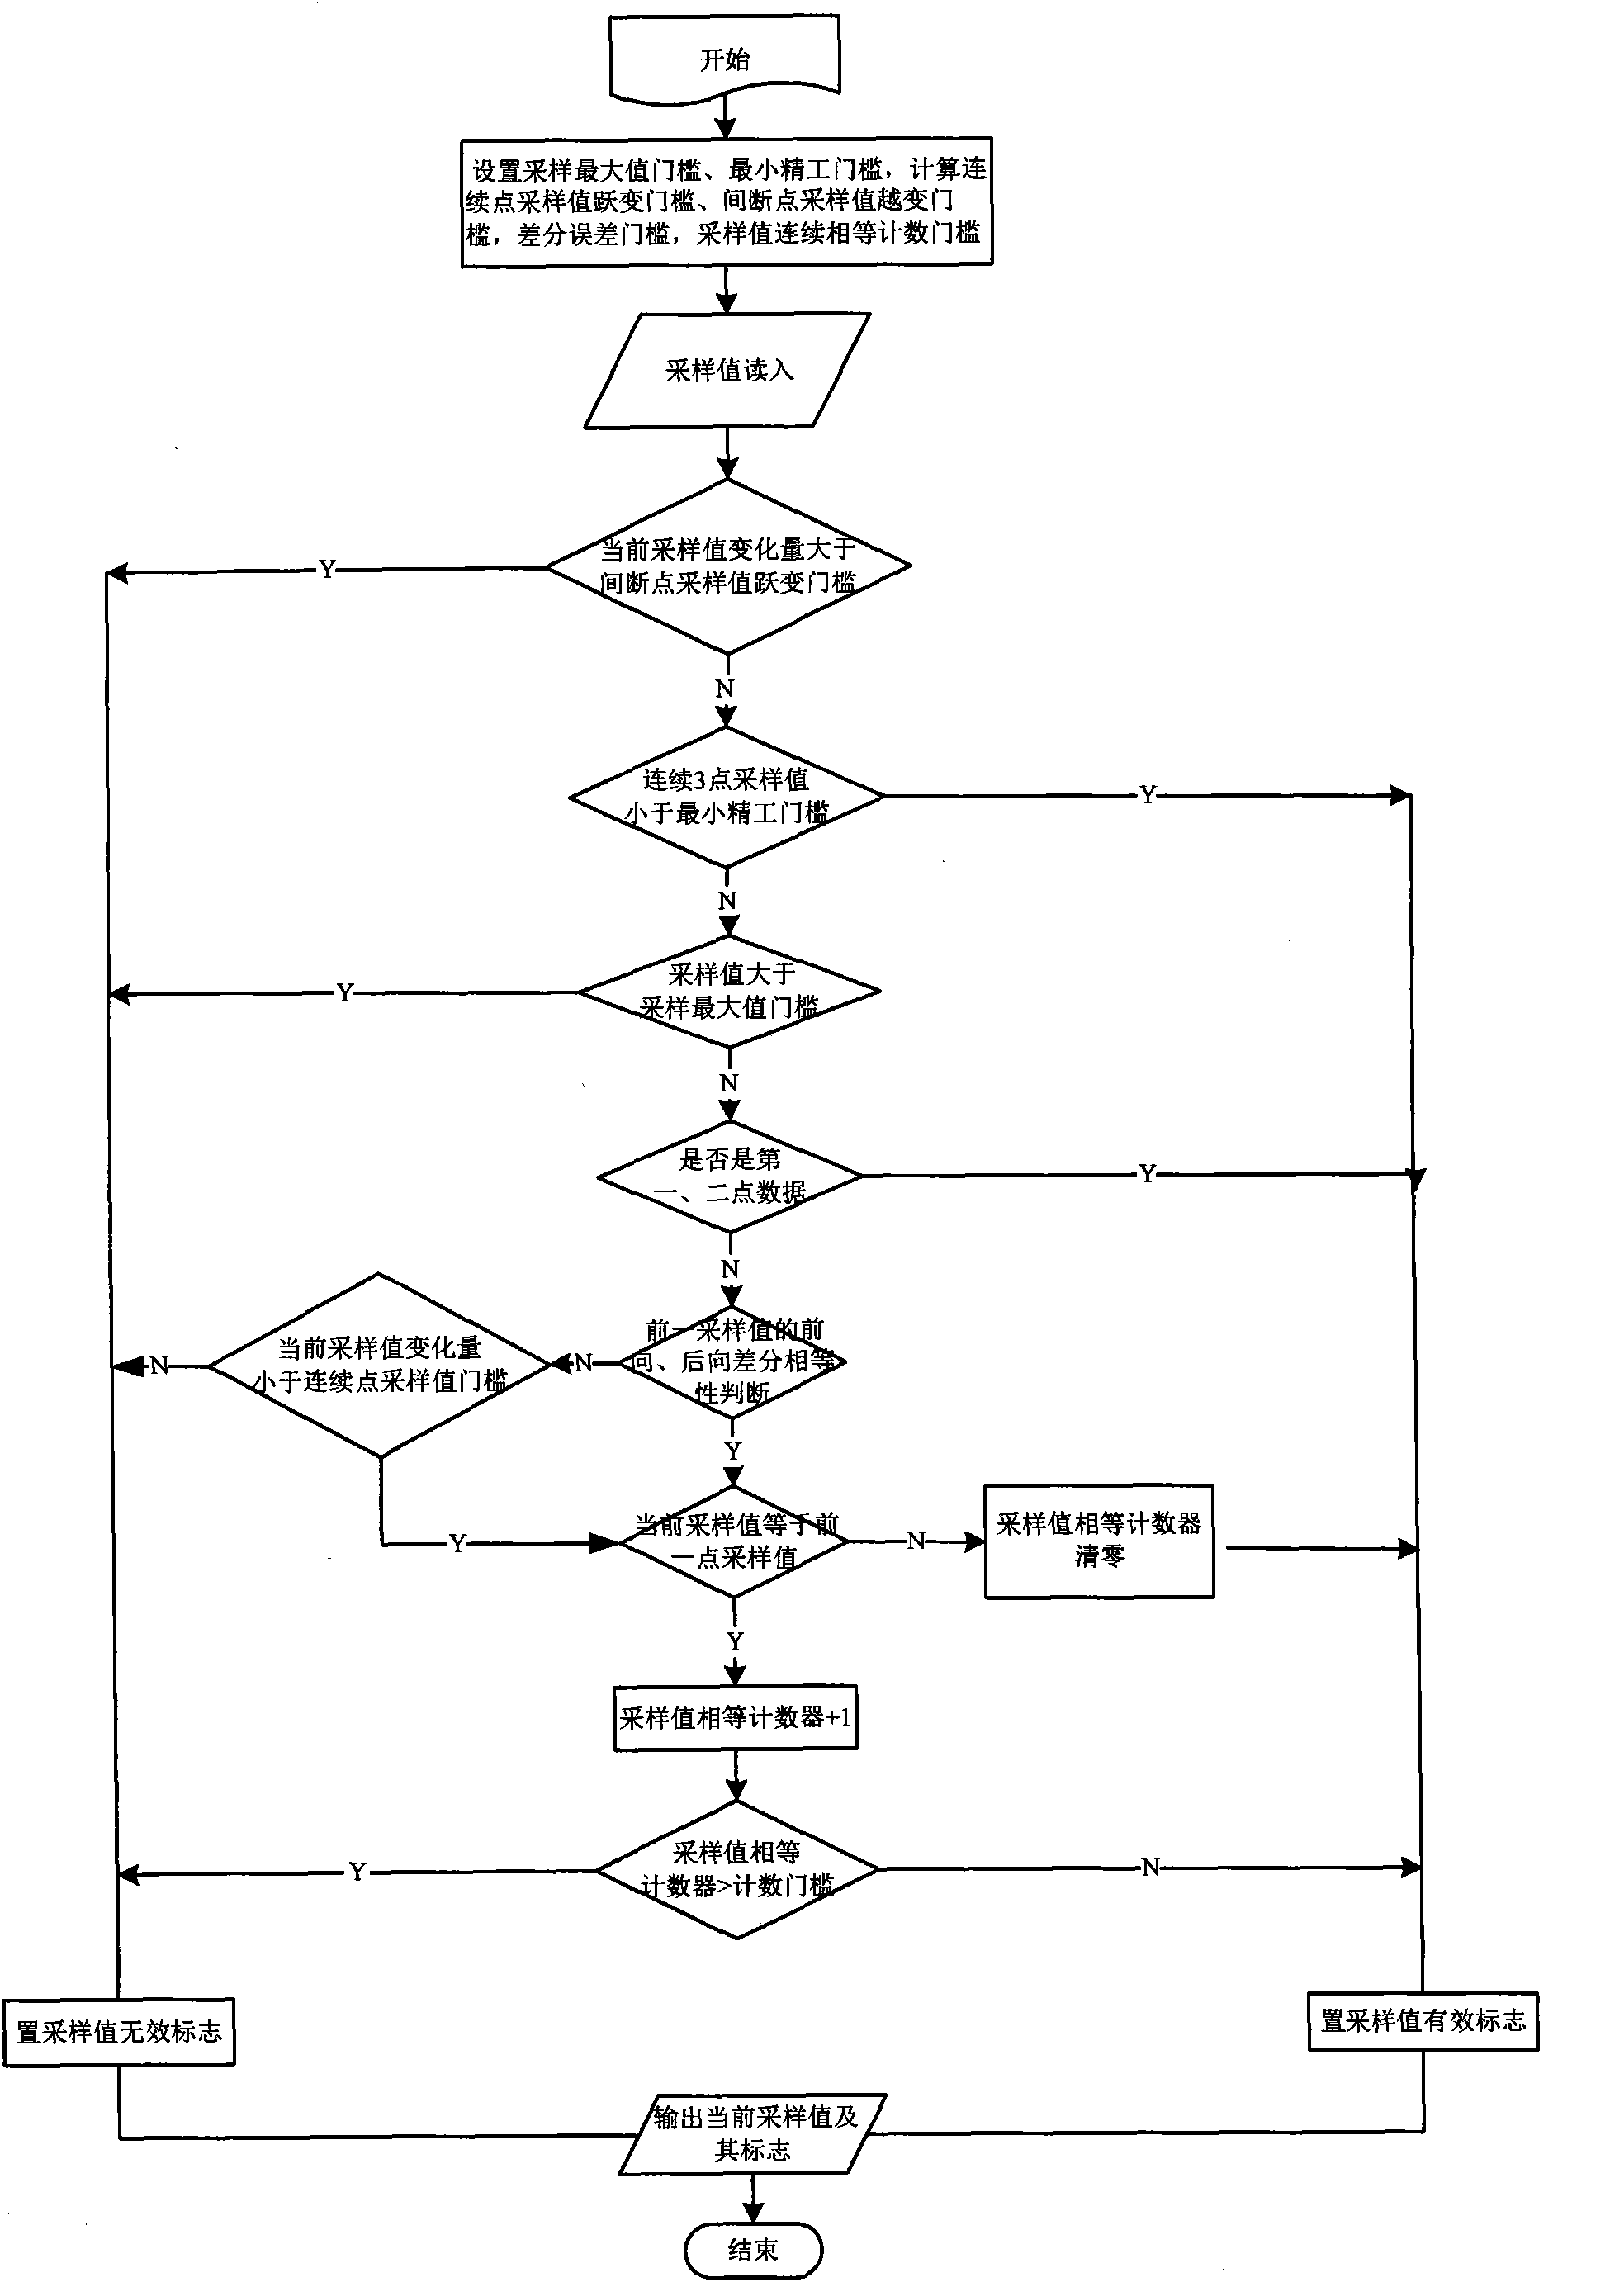 Method for distinguishing effectiveness two-time continuous sampling values of electric power system